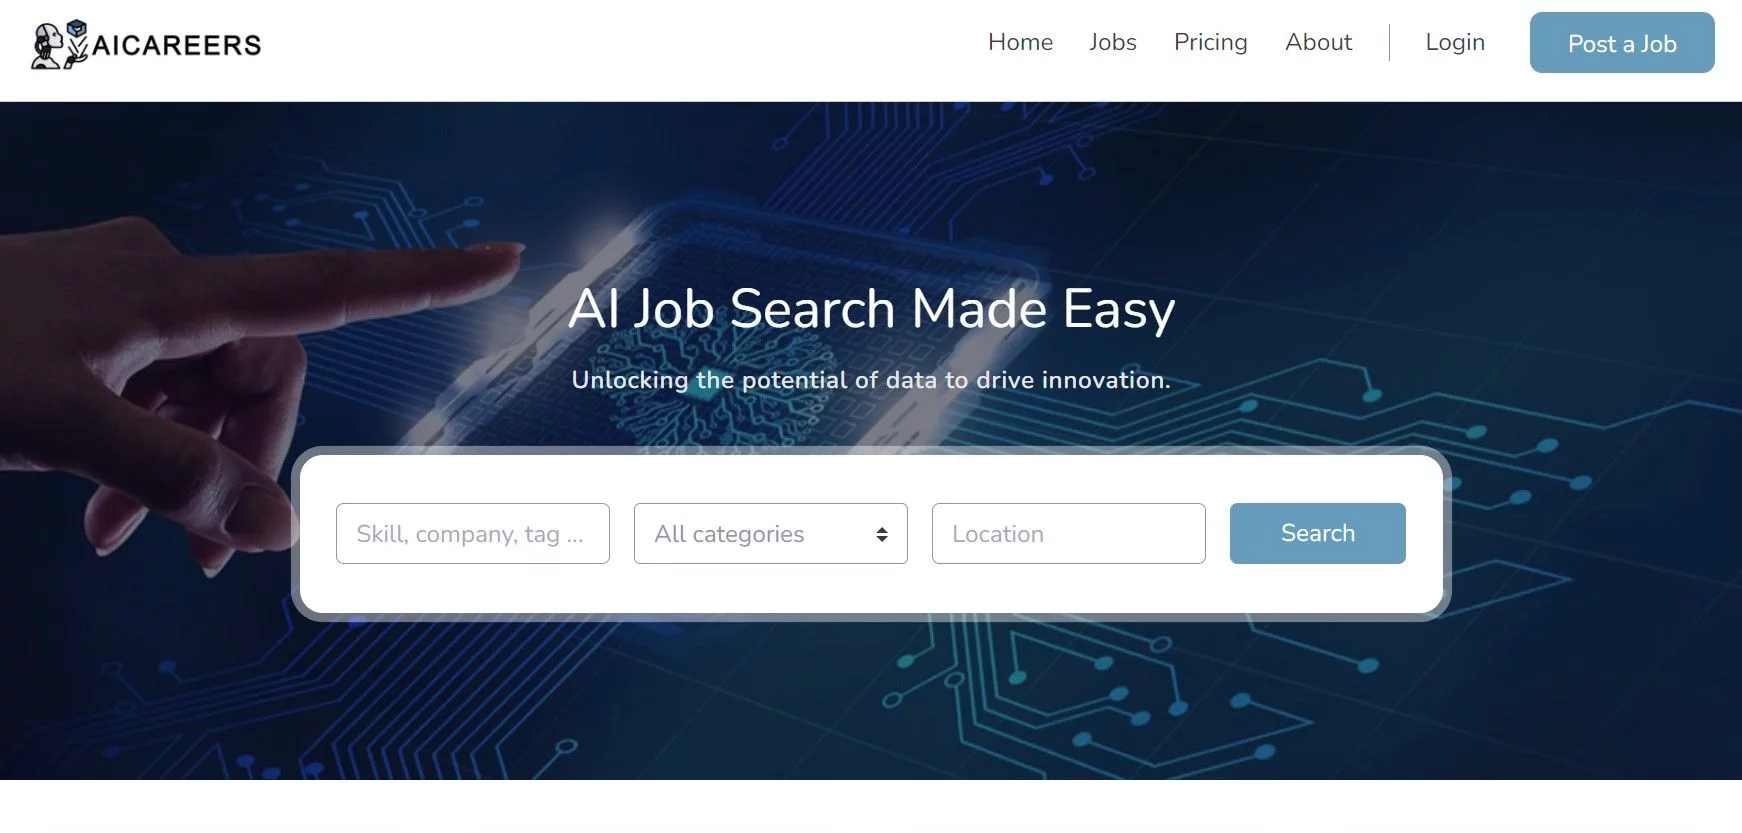  AI-powered job search to drive innovation through